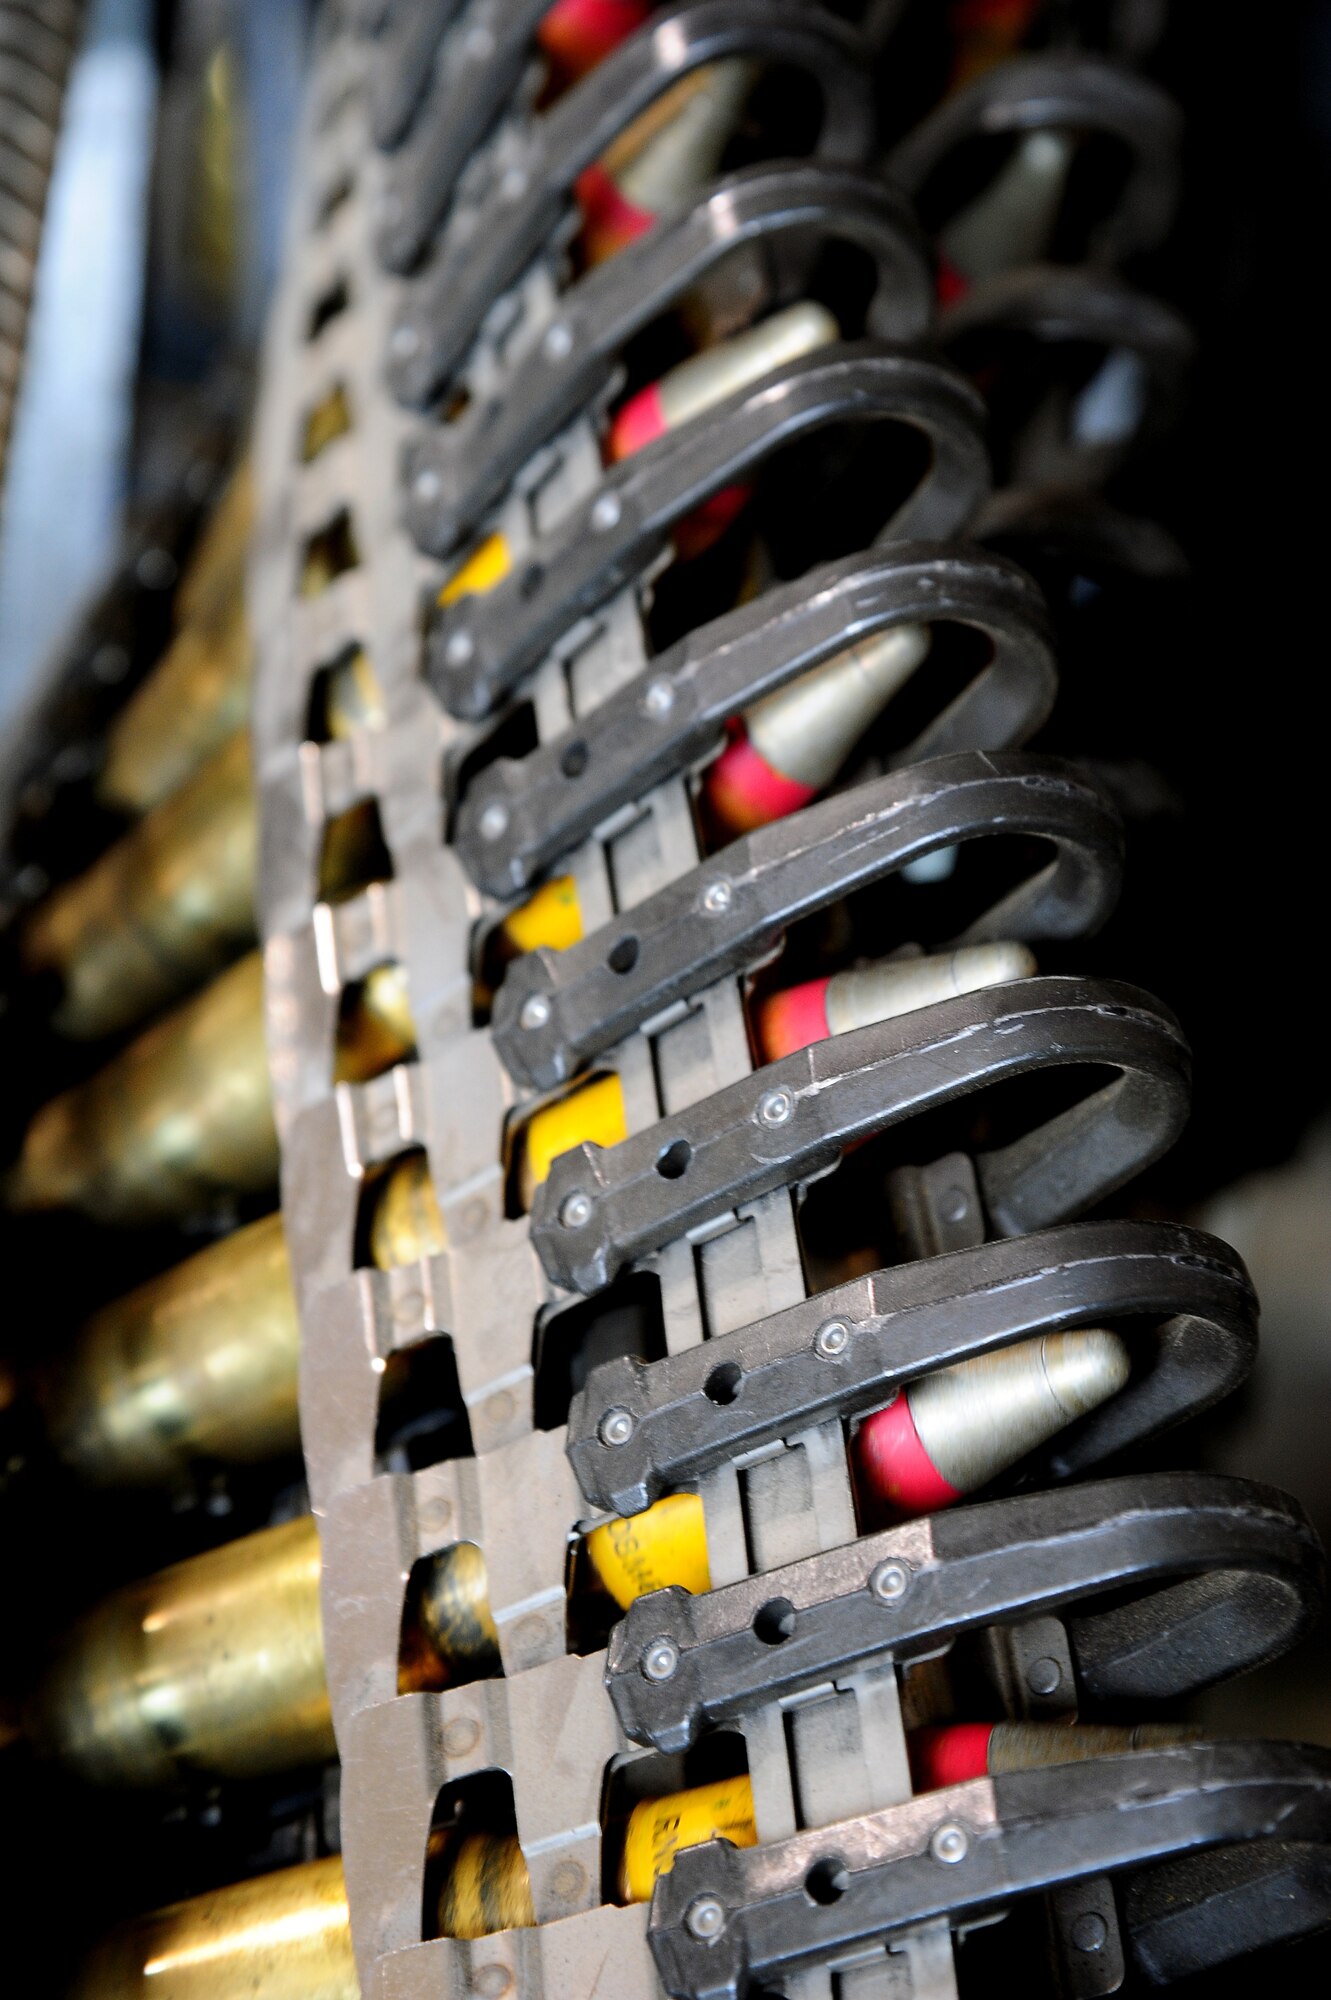 Multiple 20 mm high explosive incendiary rounds are loaded into a universal ammunition loading system by Airmen from the 35th Maintenance Squadron at Misawa Air Base, Japan, June 4, 2014, during Exercise Eager Lion at an air base in northern Jordan. Rounds similar to these were used during Eager Lion by F-16 Fighting Falcon aircraft from Misawa. (U.S. Air Force photo by Staff Sgt. Brigitte N. Brantley/Released)